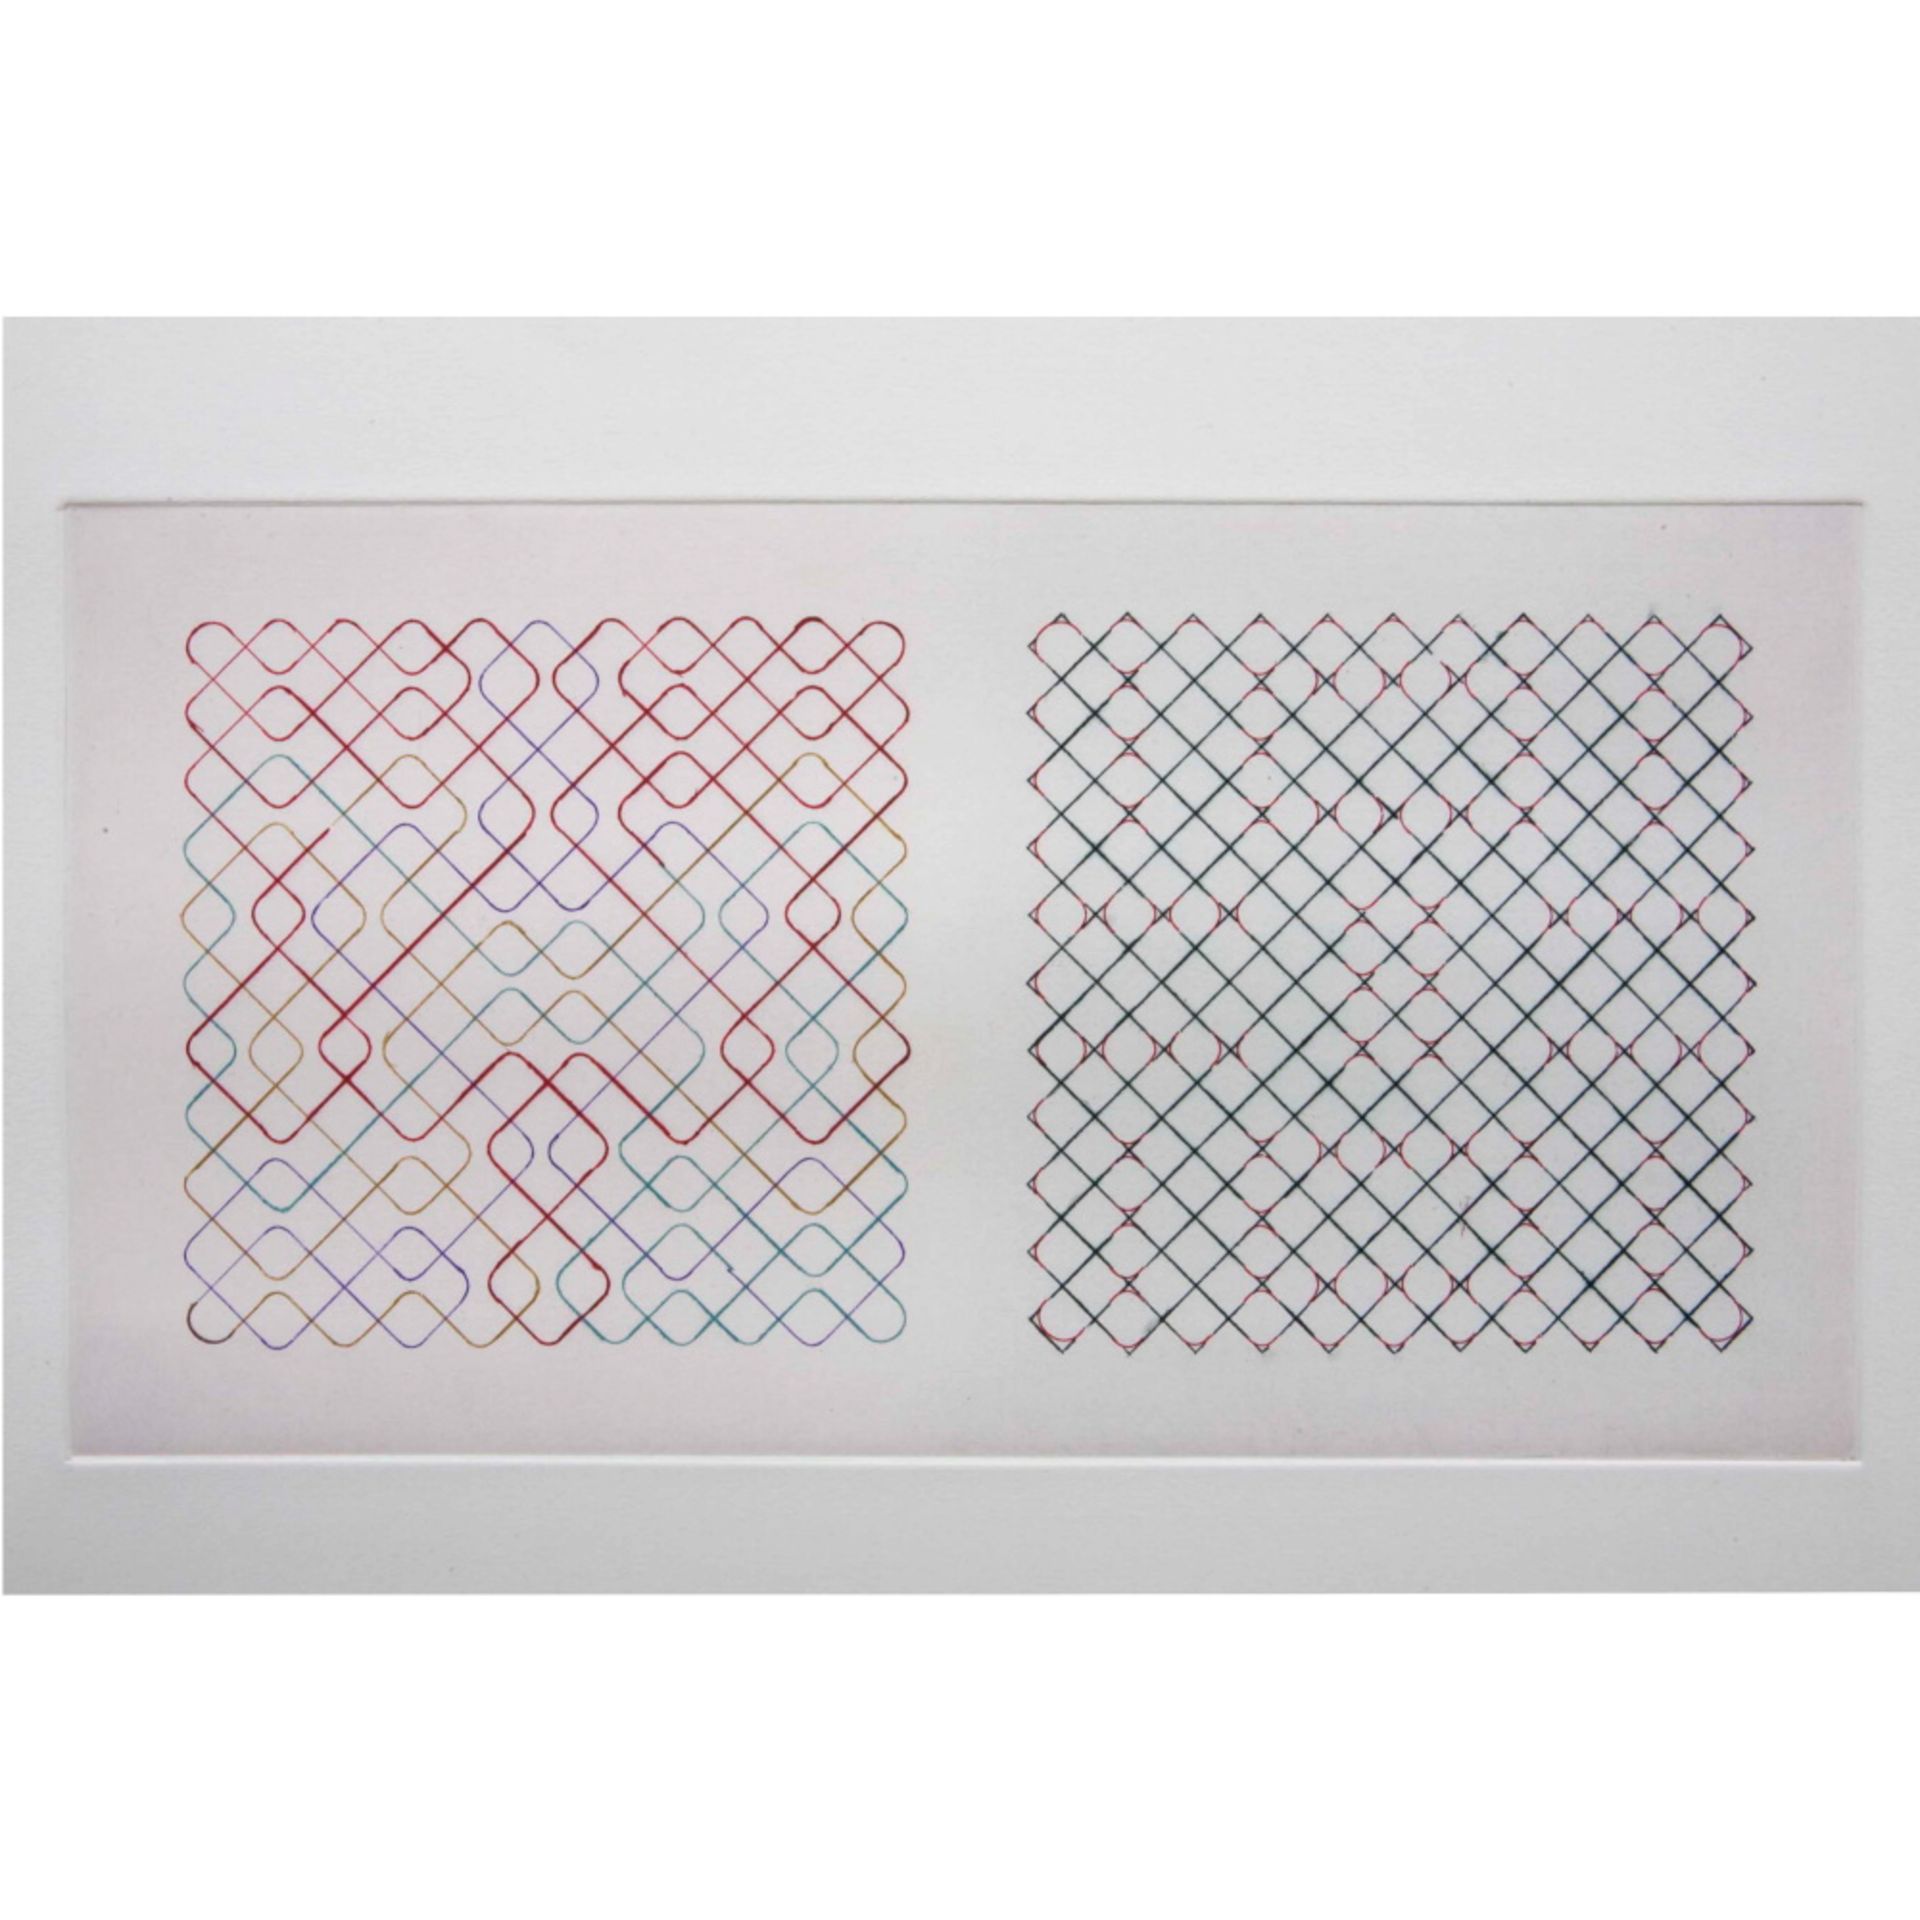 Bernard FRIZE Compostion, 2009 Etching on paper Arches Signed and numbered in [...]